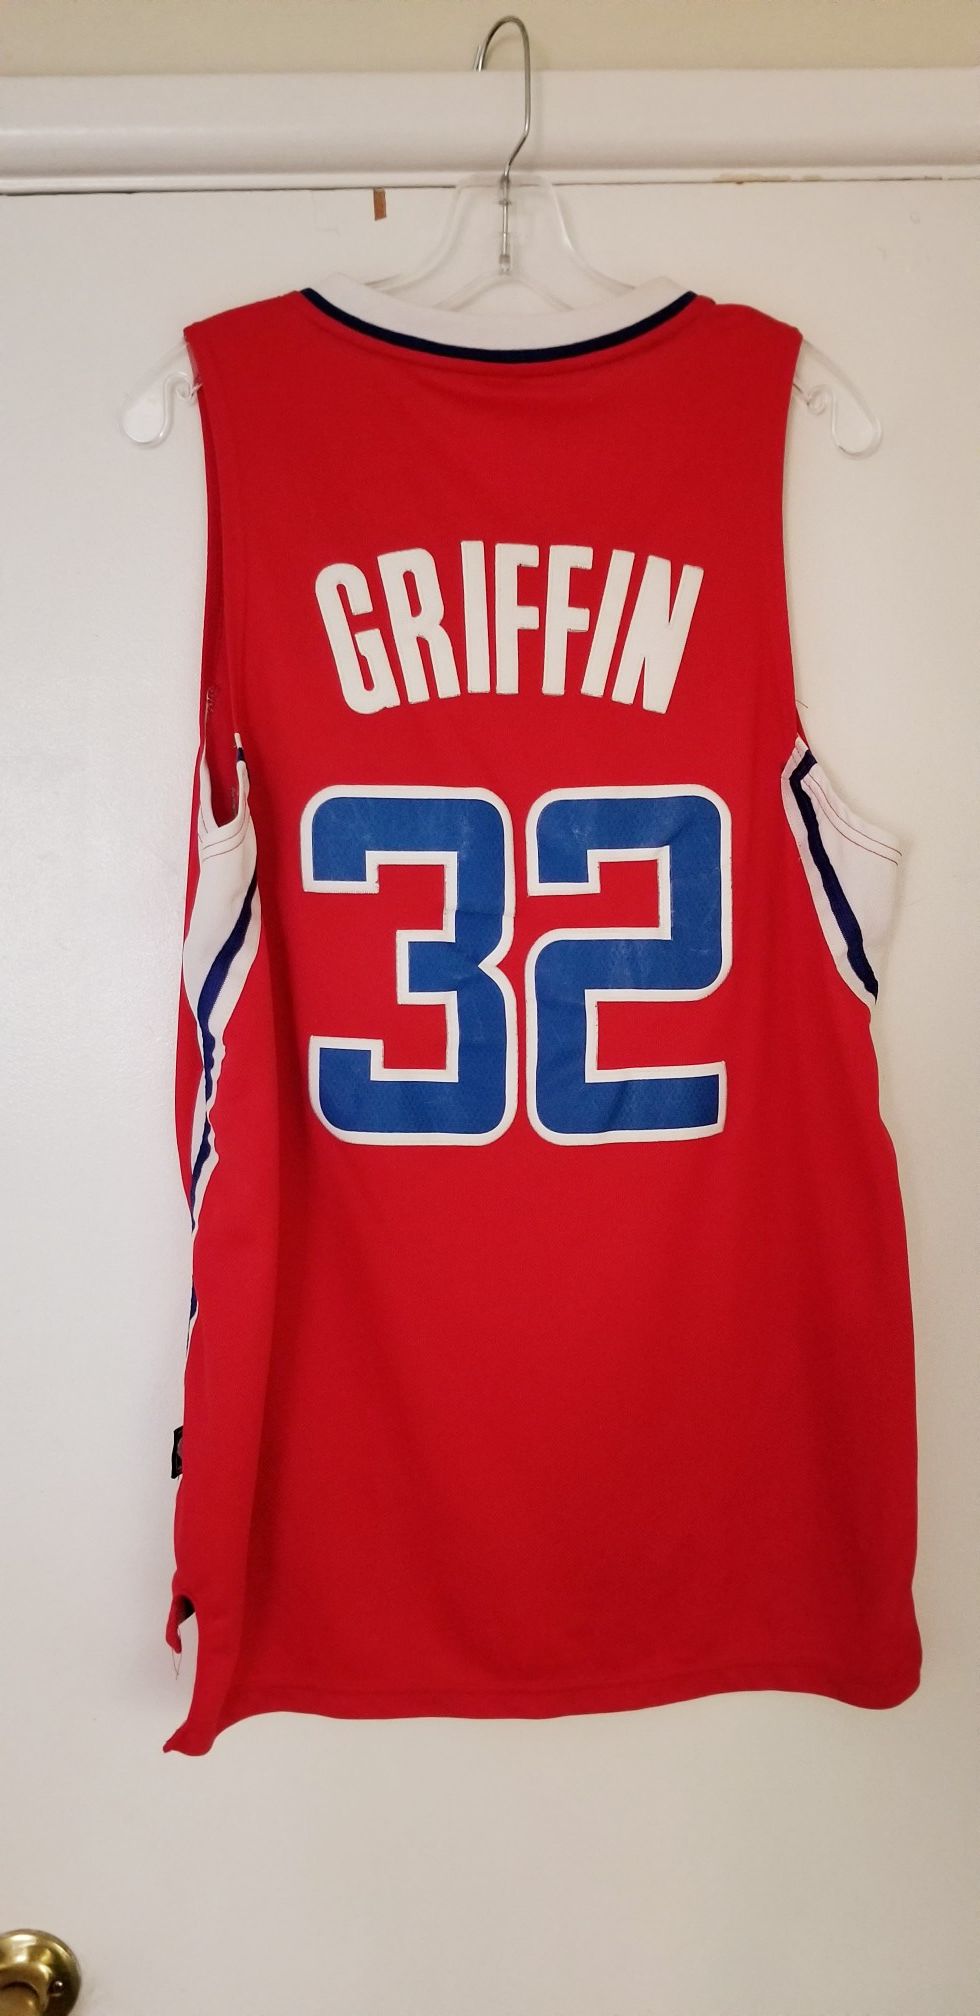 Blake Griffin LA Clippers Medium Stitched Jersey in Good Condition!